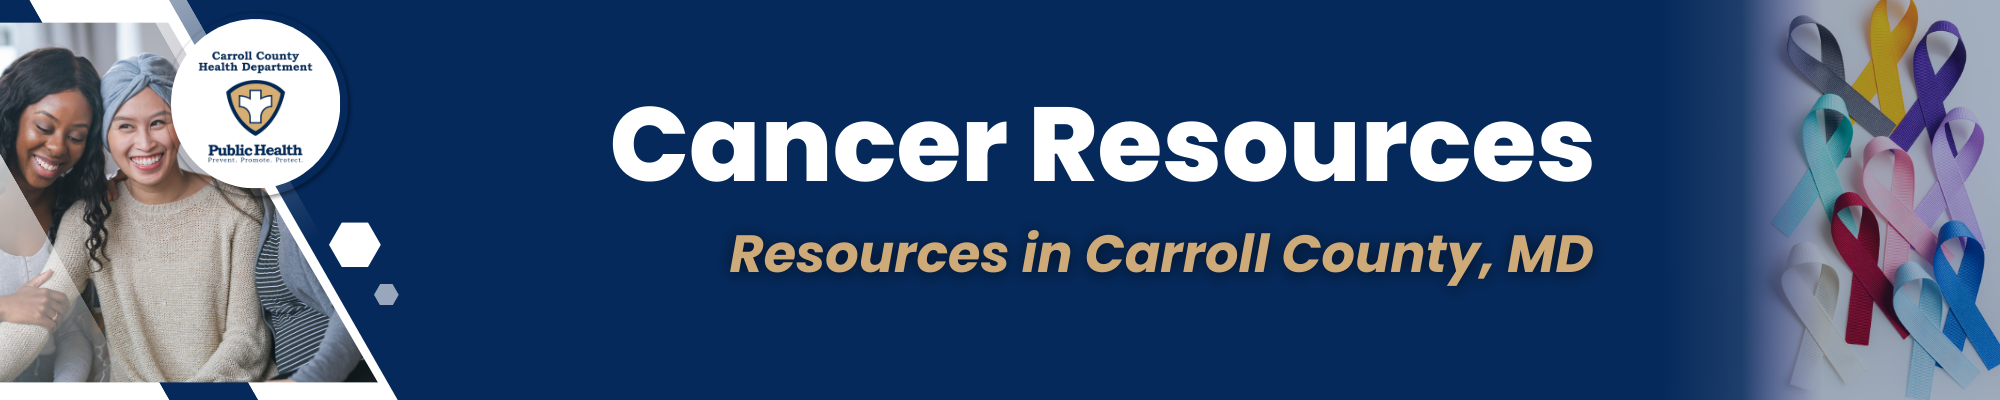 Cancer resource program banner, image of various cancer ribbons, image of women consoling each other.